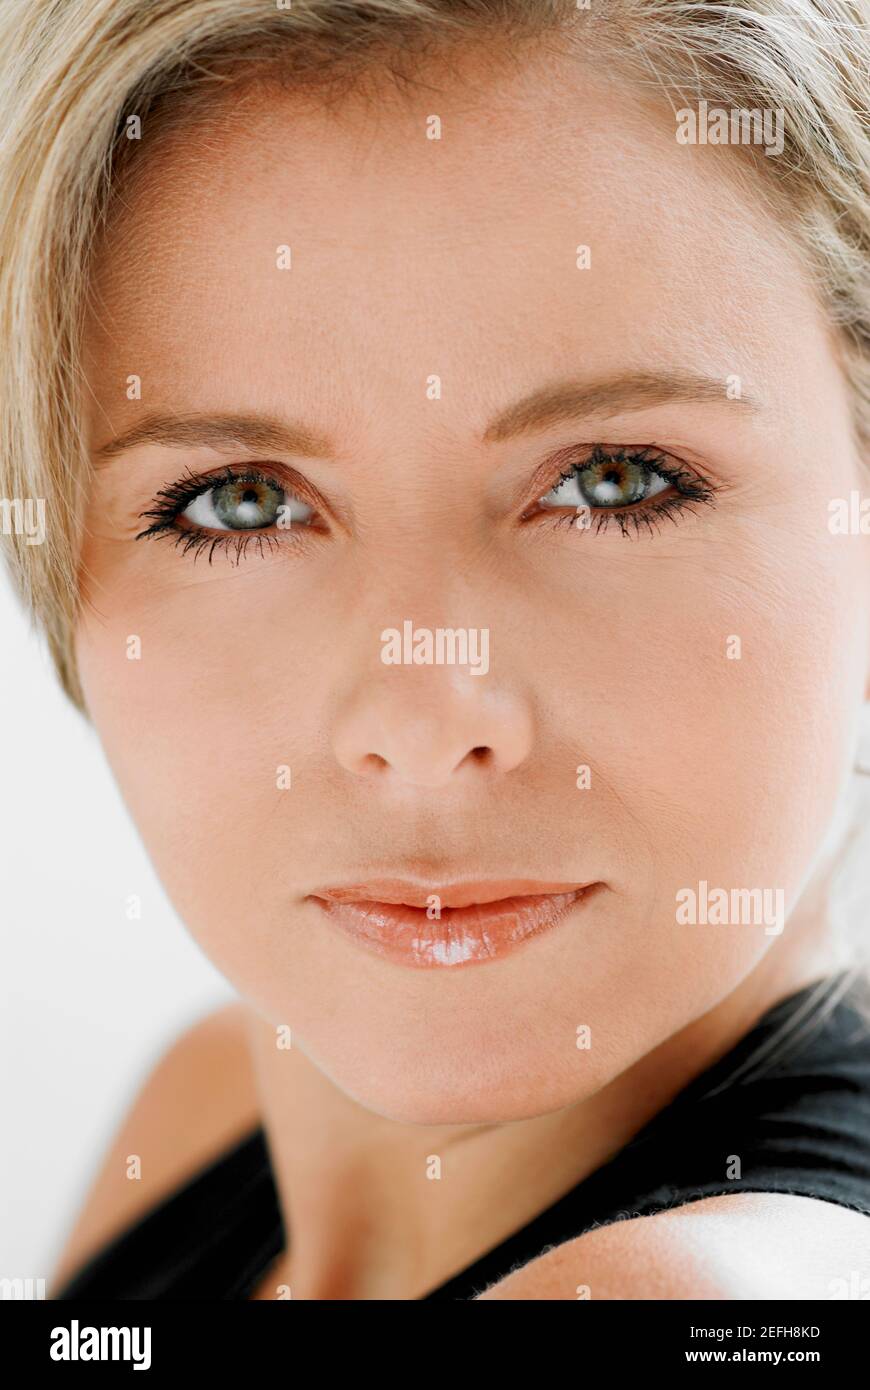 Portrait of a mid adult woman Stock Photo